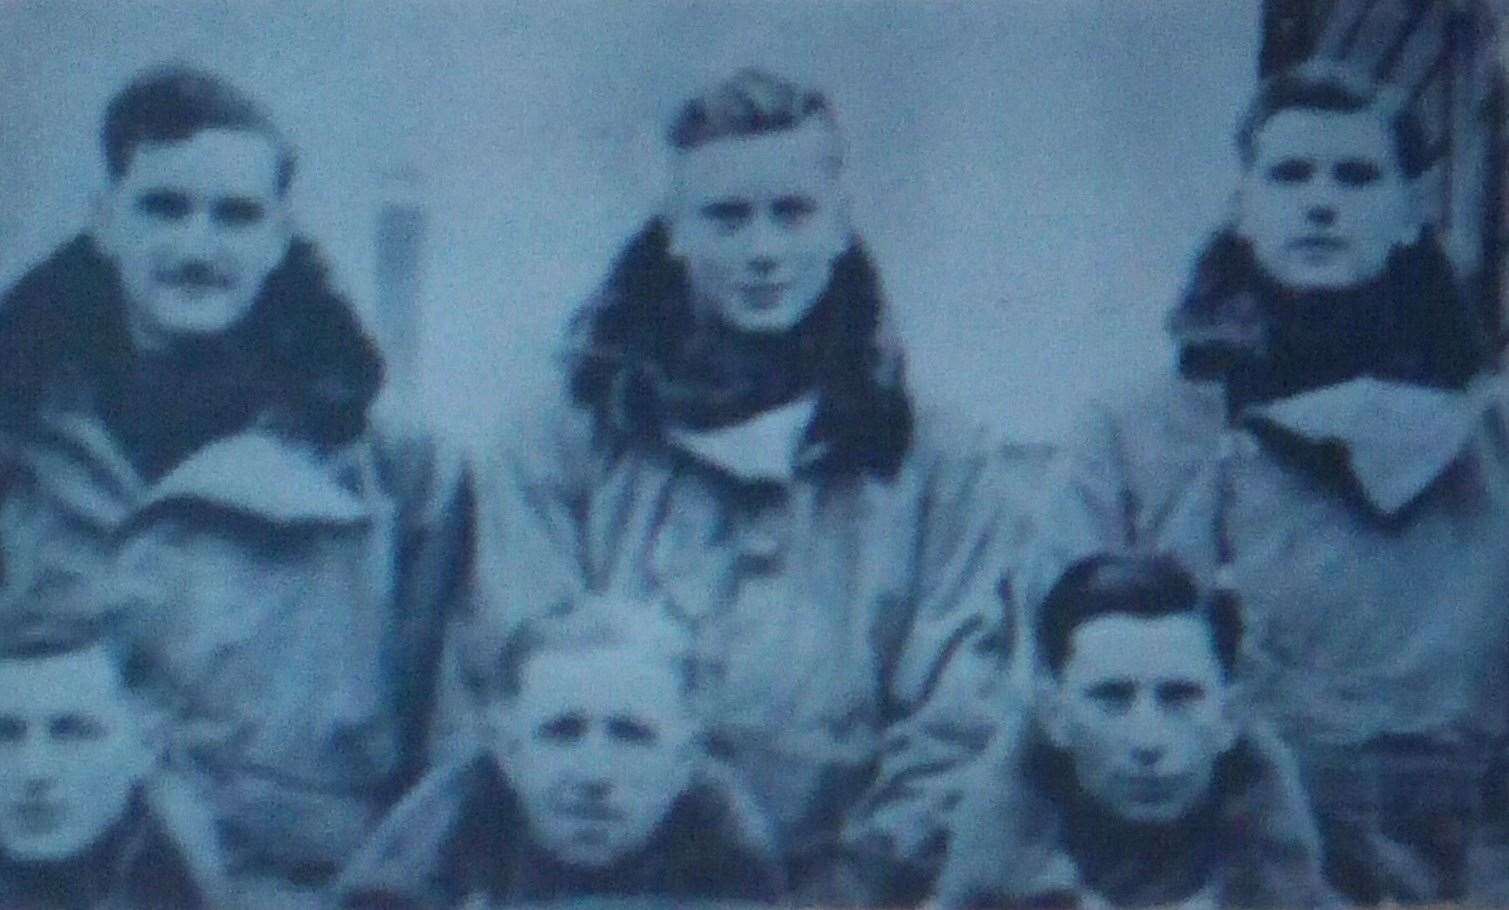 Alf with his loyal crew who completed 19 missions during the Second World War